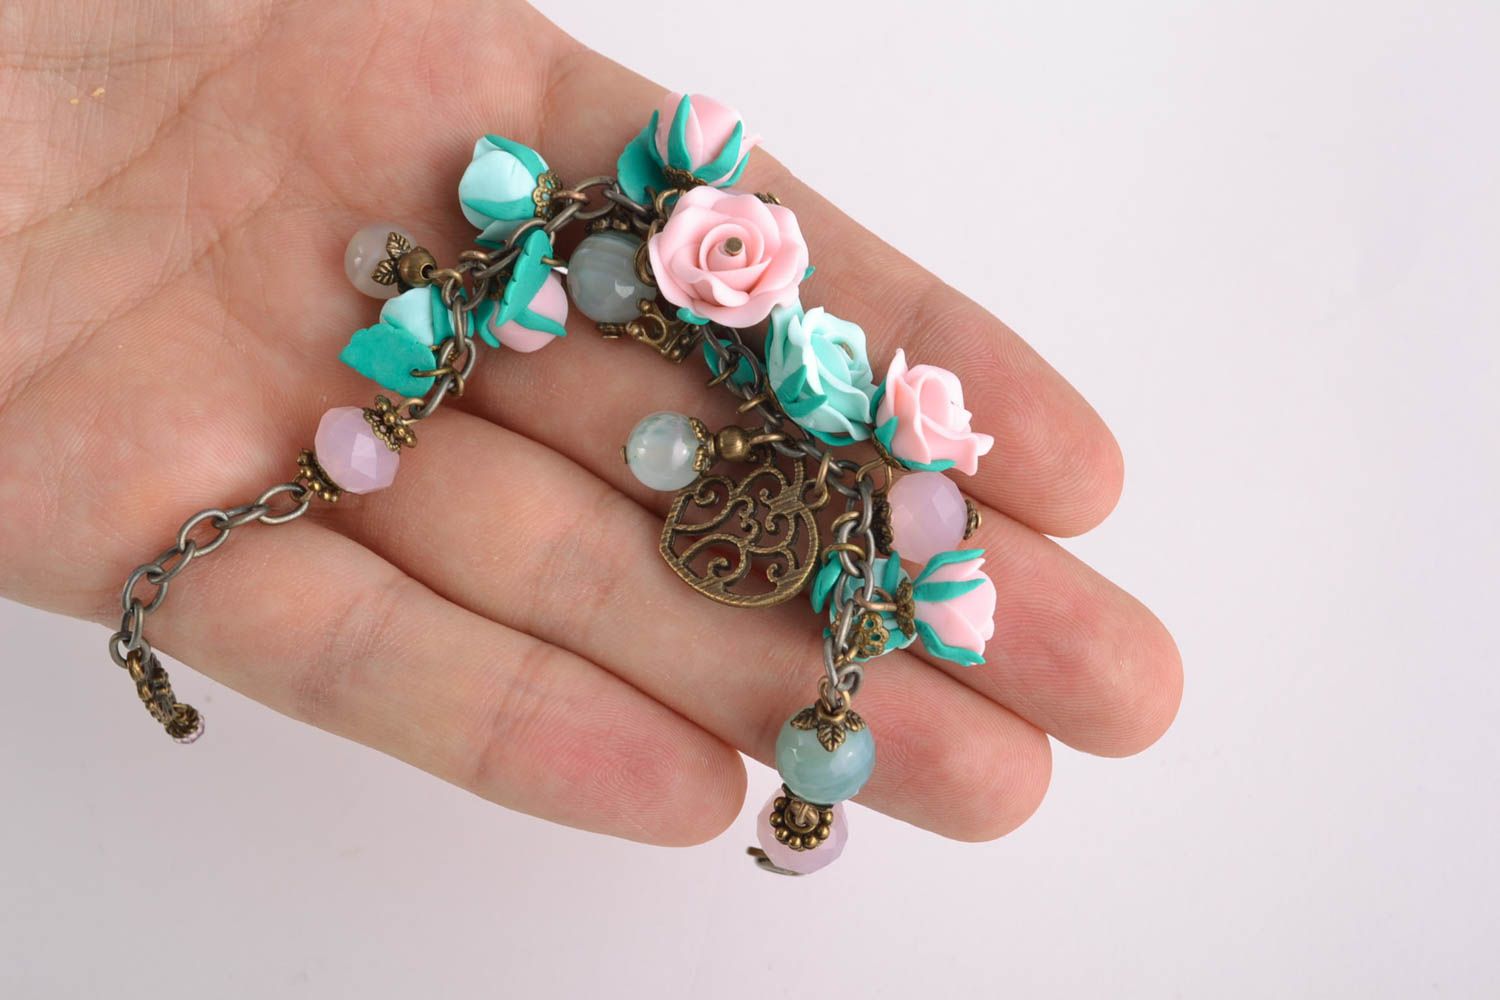 Charm bracelet with pink and turquoise roses and bronze charms photo 3